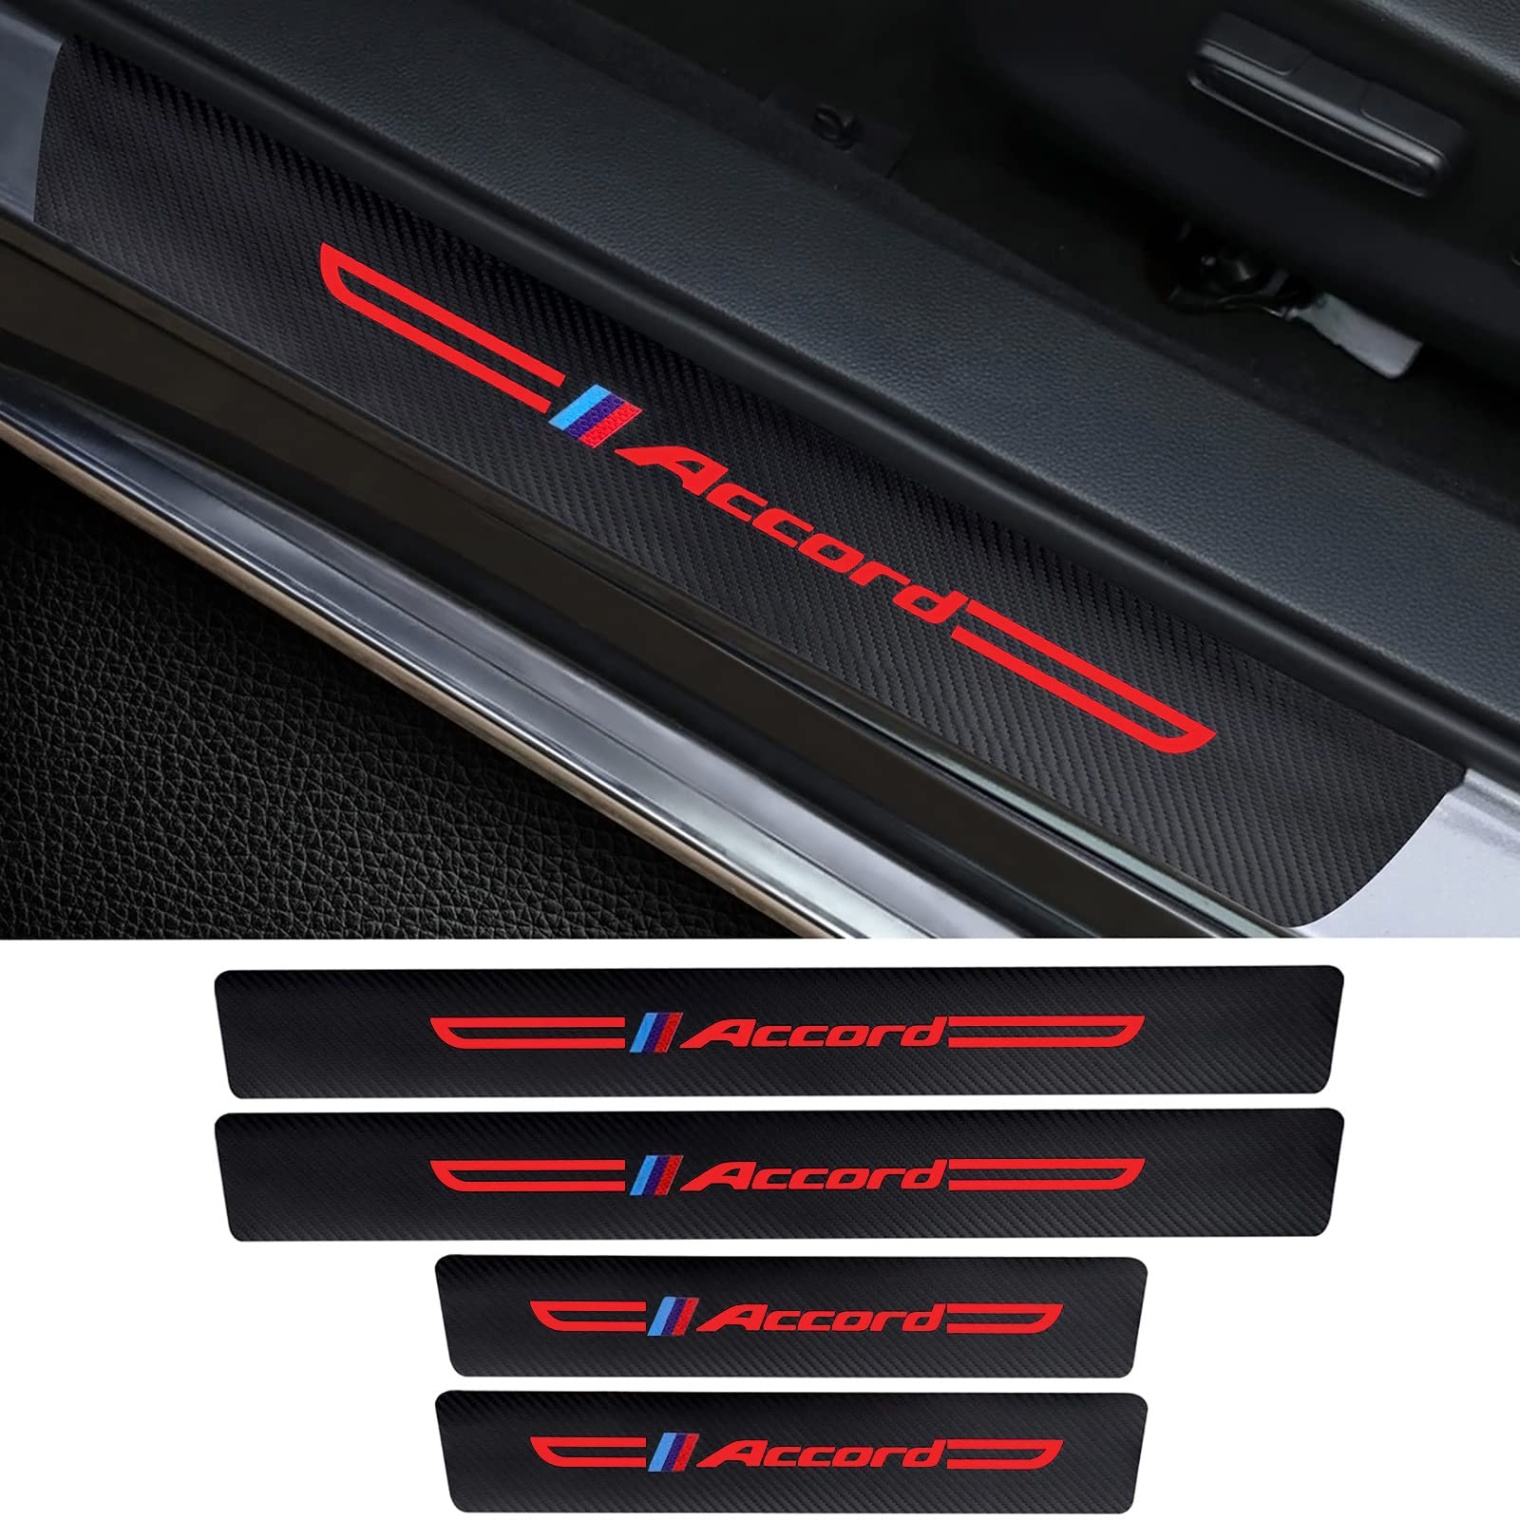 accessories for honda accord Bulan 2 PCS for Accord Door Sill Protector Compatible with Accord Accessories,  Carbon Fiber Leather Door Sill Sticker, Reflective Automotive Door Sill  Guard,